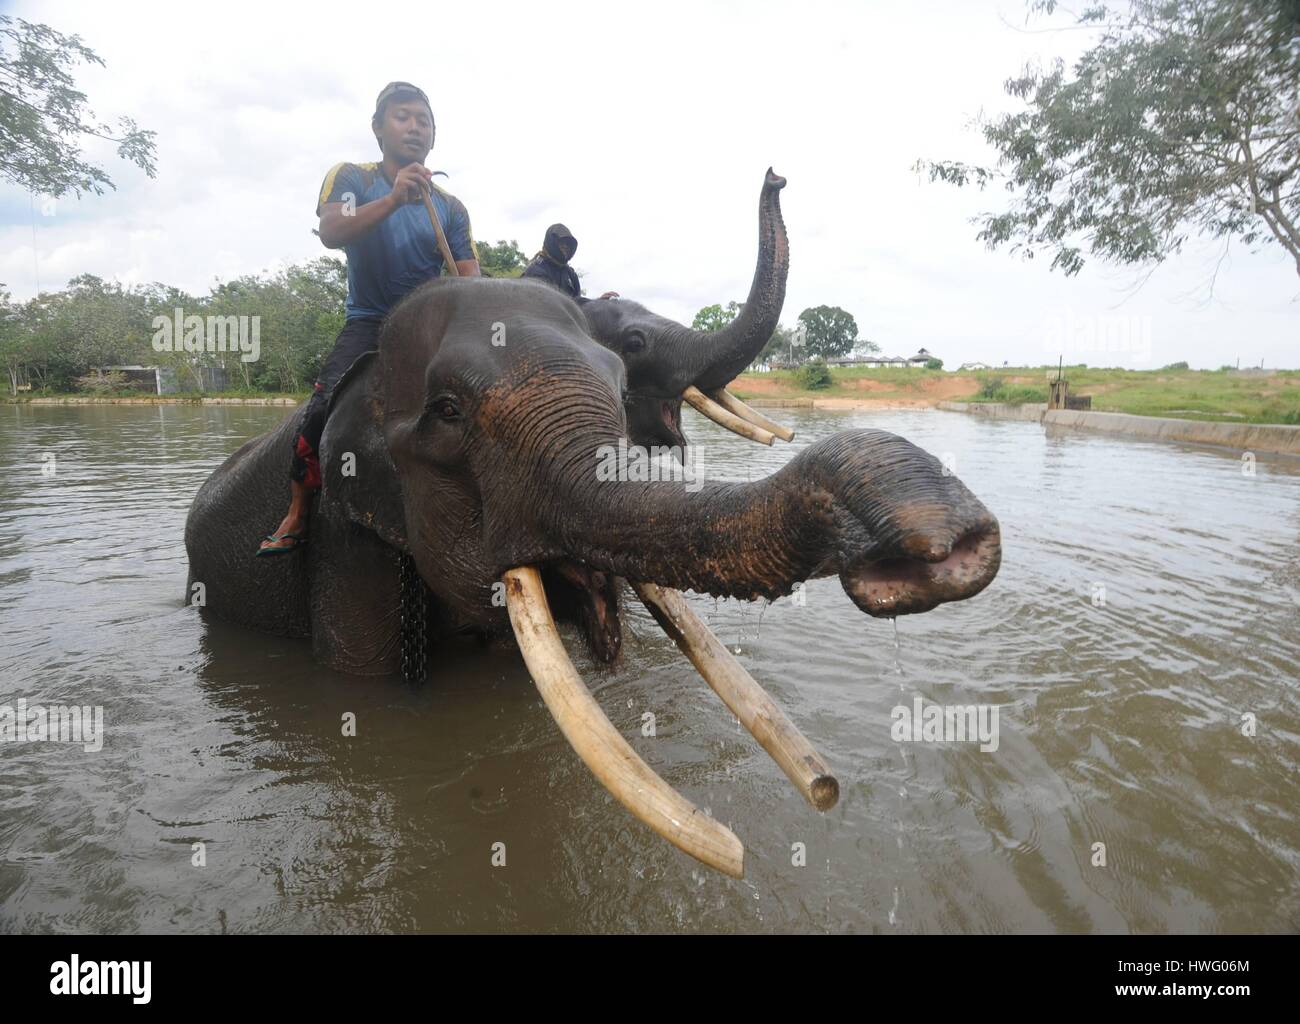 Lampung, Indonesia. 20th Mar, 2017. Photo taken on March 20, 2017 shows two mahouts bathing Sumatran elephants in water reservoir at elephant training center in Way Kambas National Park, East Lampung district, Lampung Province, Indonesia. Credit: Agung Kuncahya B./Xinhua/Alamy Live News Stock Photo